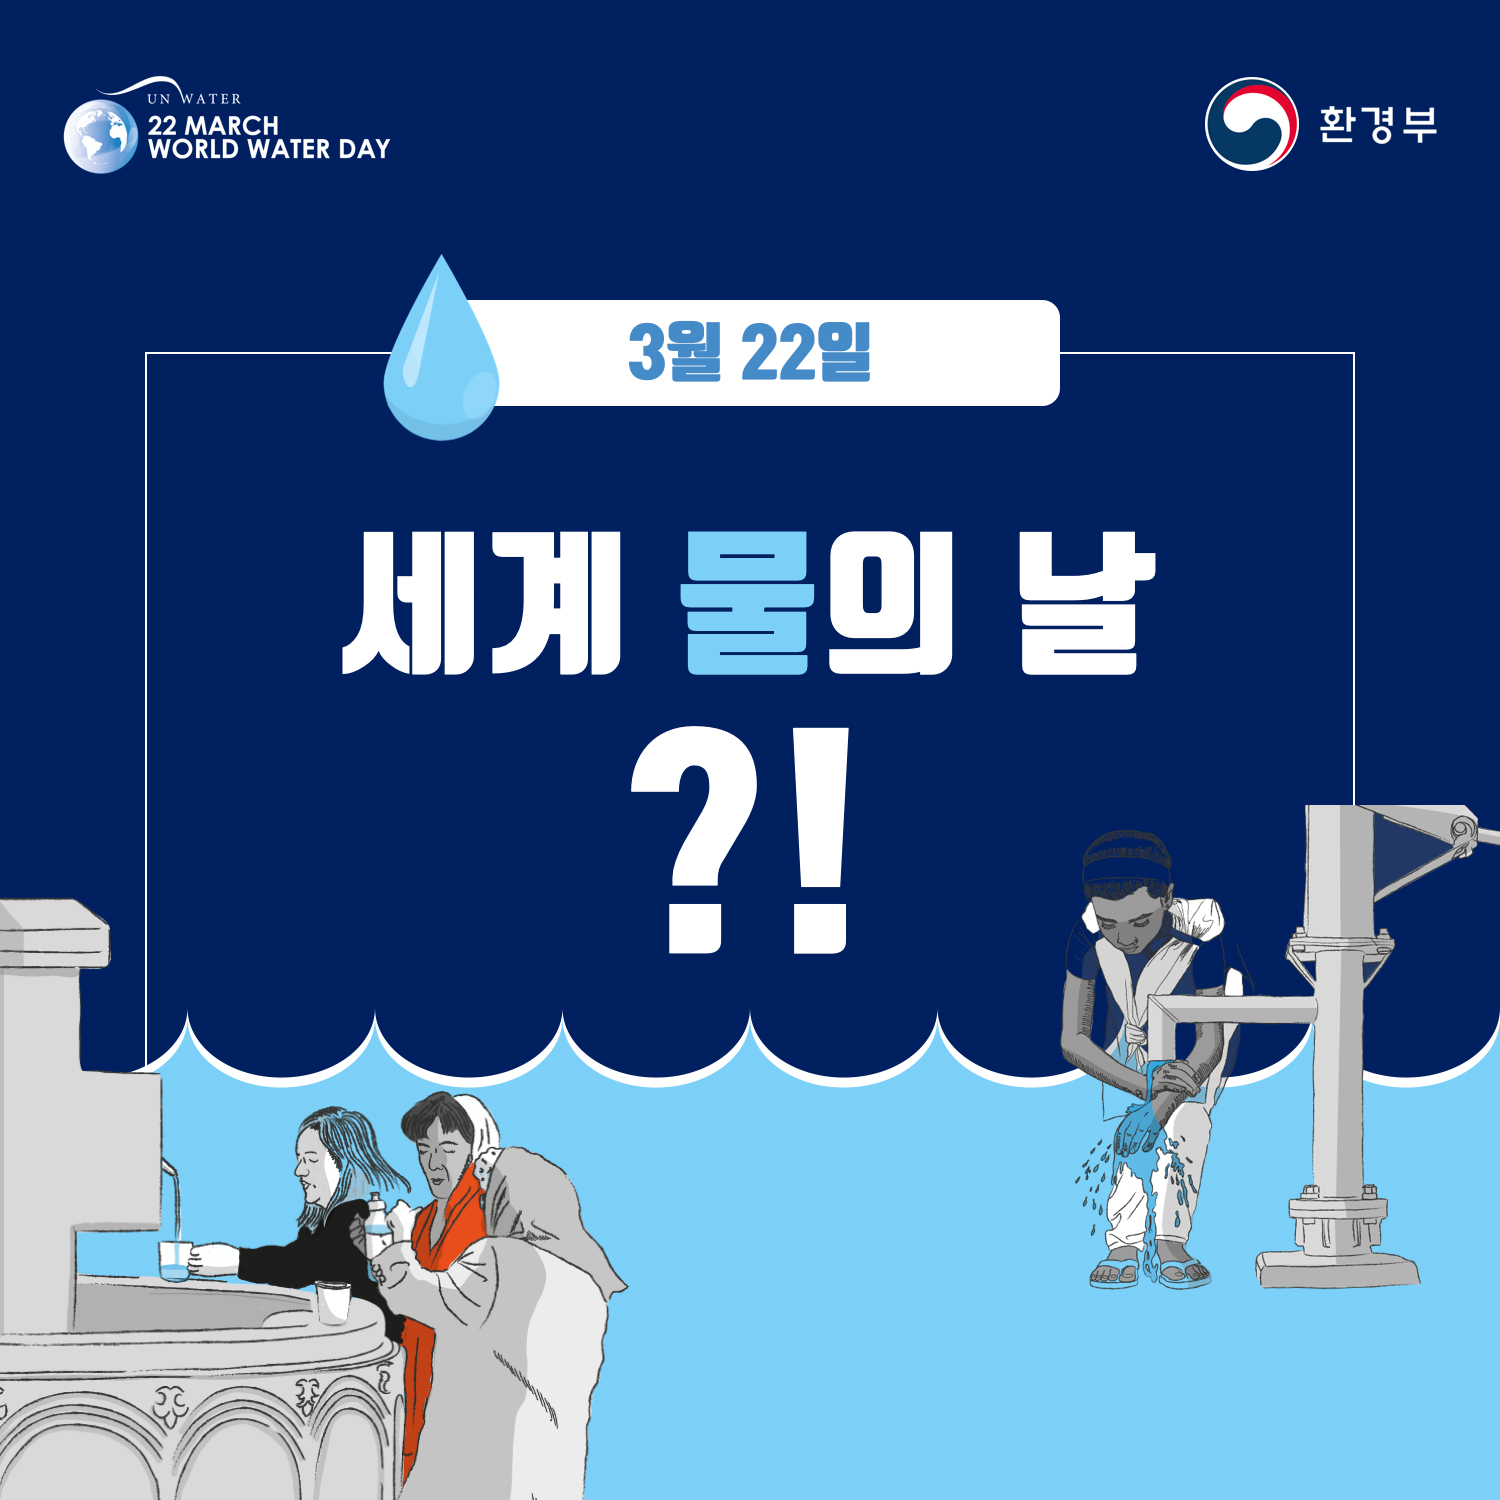 [UN WATER 22 MARCH WORLD WATER DAY 환경부] 3월 22일 세계 물의 날?!
